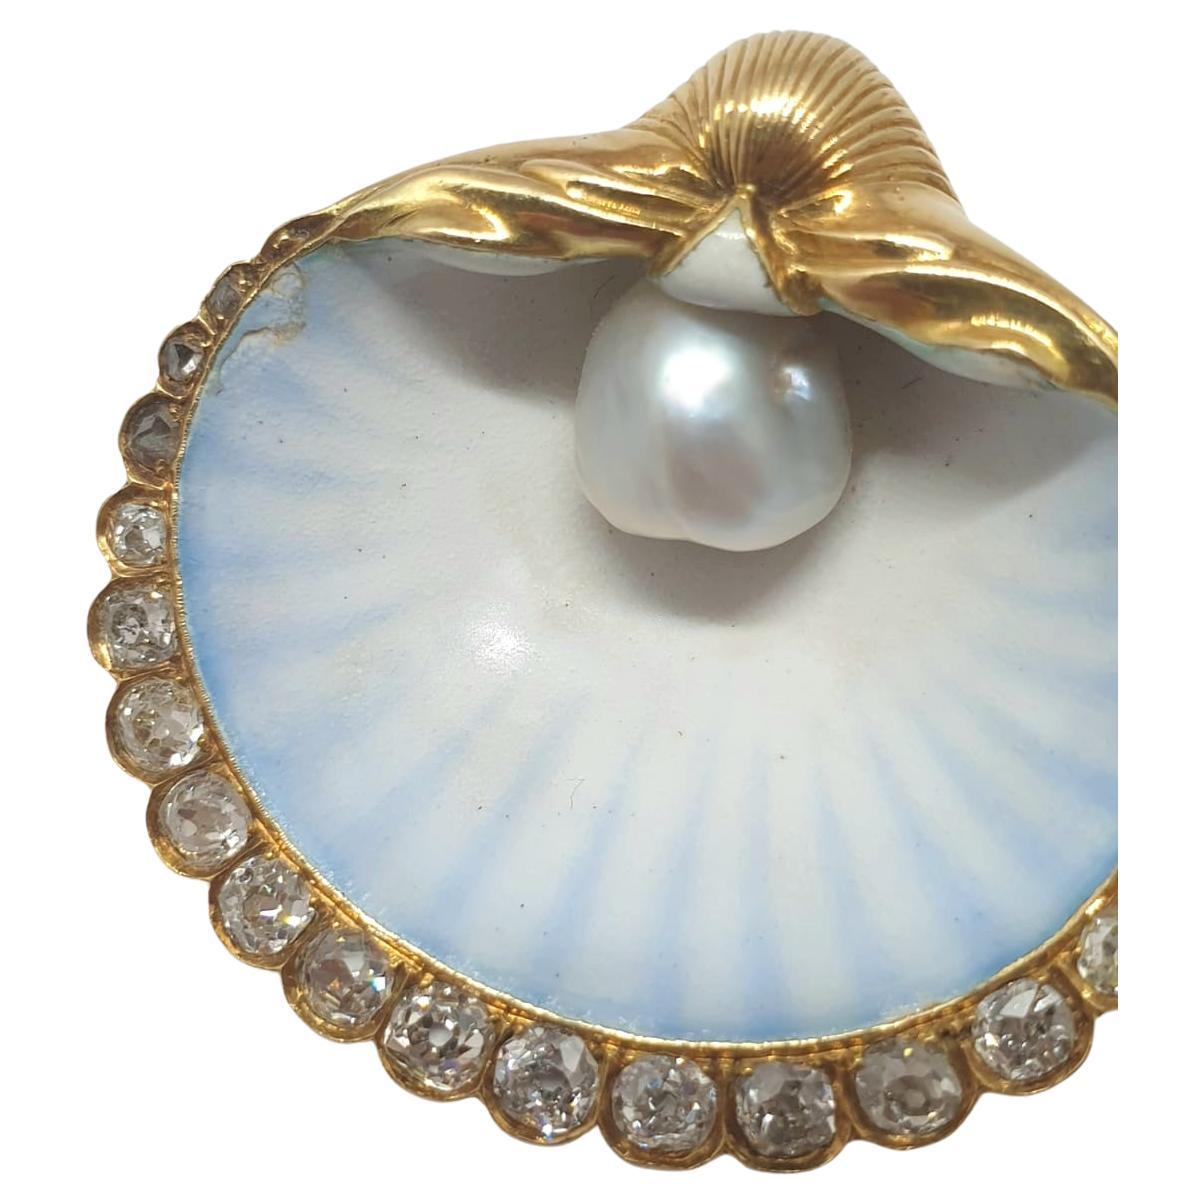 Antique french 18k gold shell brooch centered with 1 large natural white south sea pearl size 8mm diameter flanked with old mine cut diamonds and colorful enamel hall marked with 19th century french owl mark brooch lenght 4cm and total gold weight